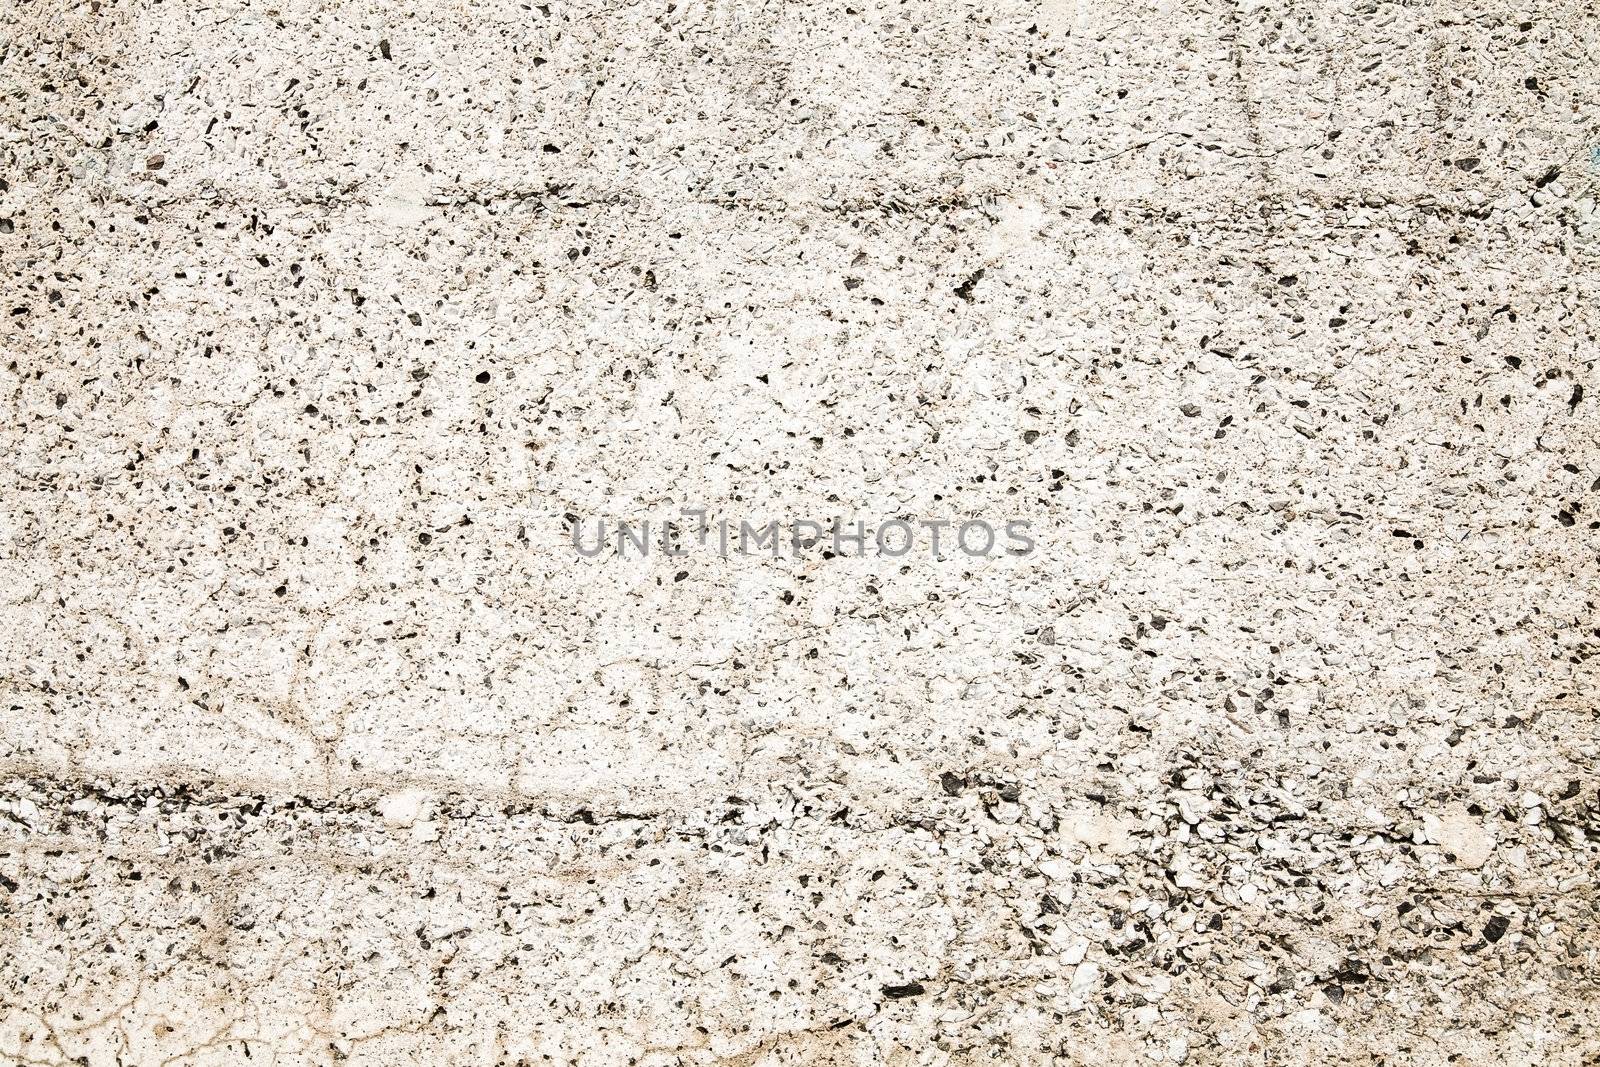 Concrete texture with a lot of details using natural lighting.